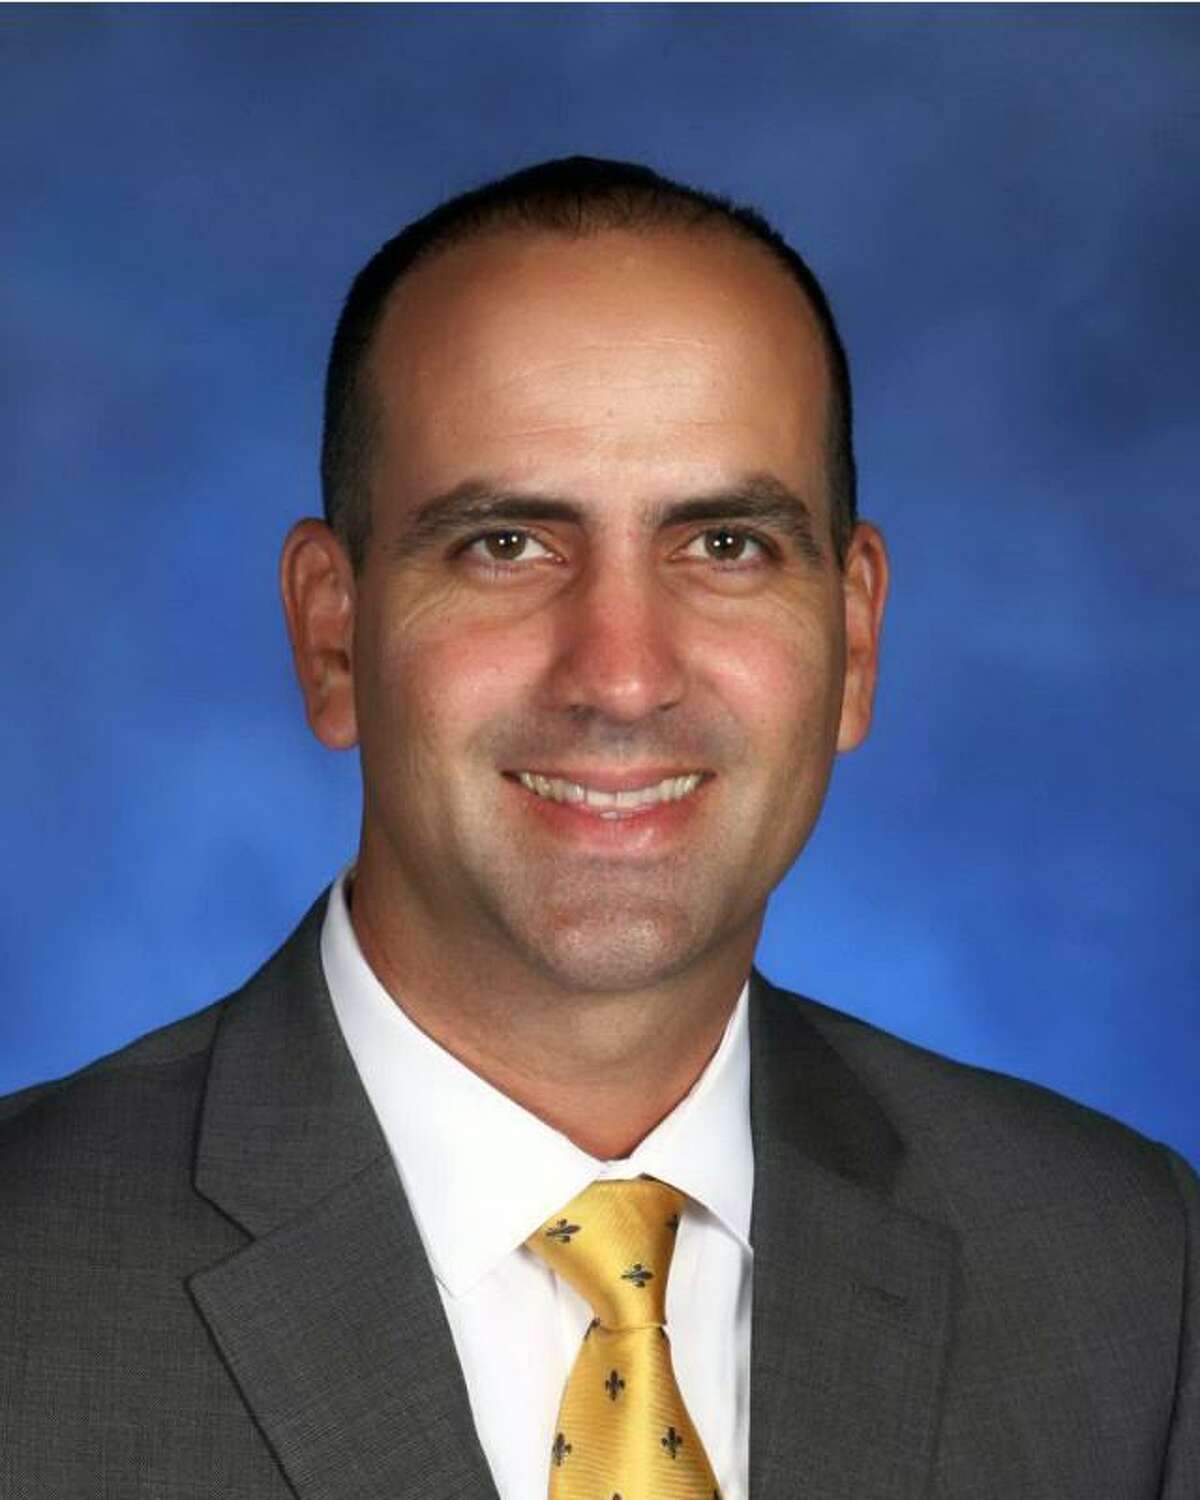 Dr. Thomas de Quesada will take over as Principal at Fairfield Preparatory School as of July 1, 2018, the school recently announced.